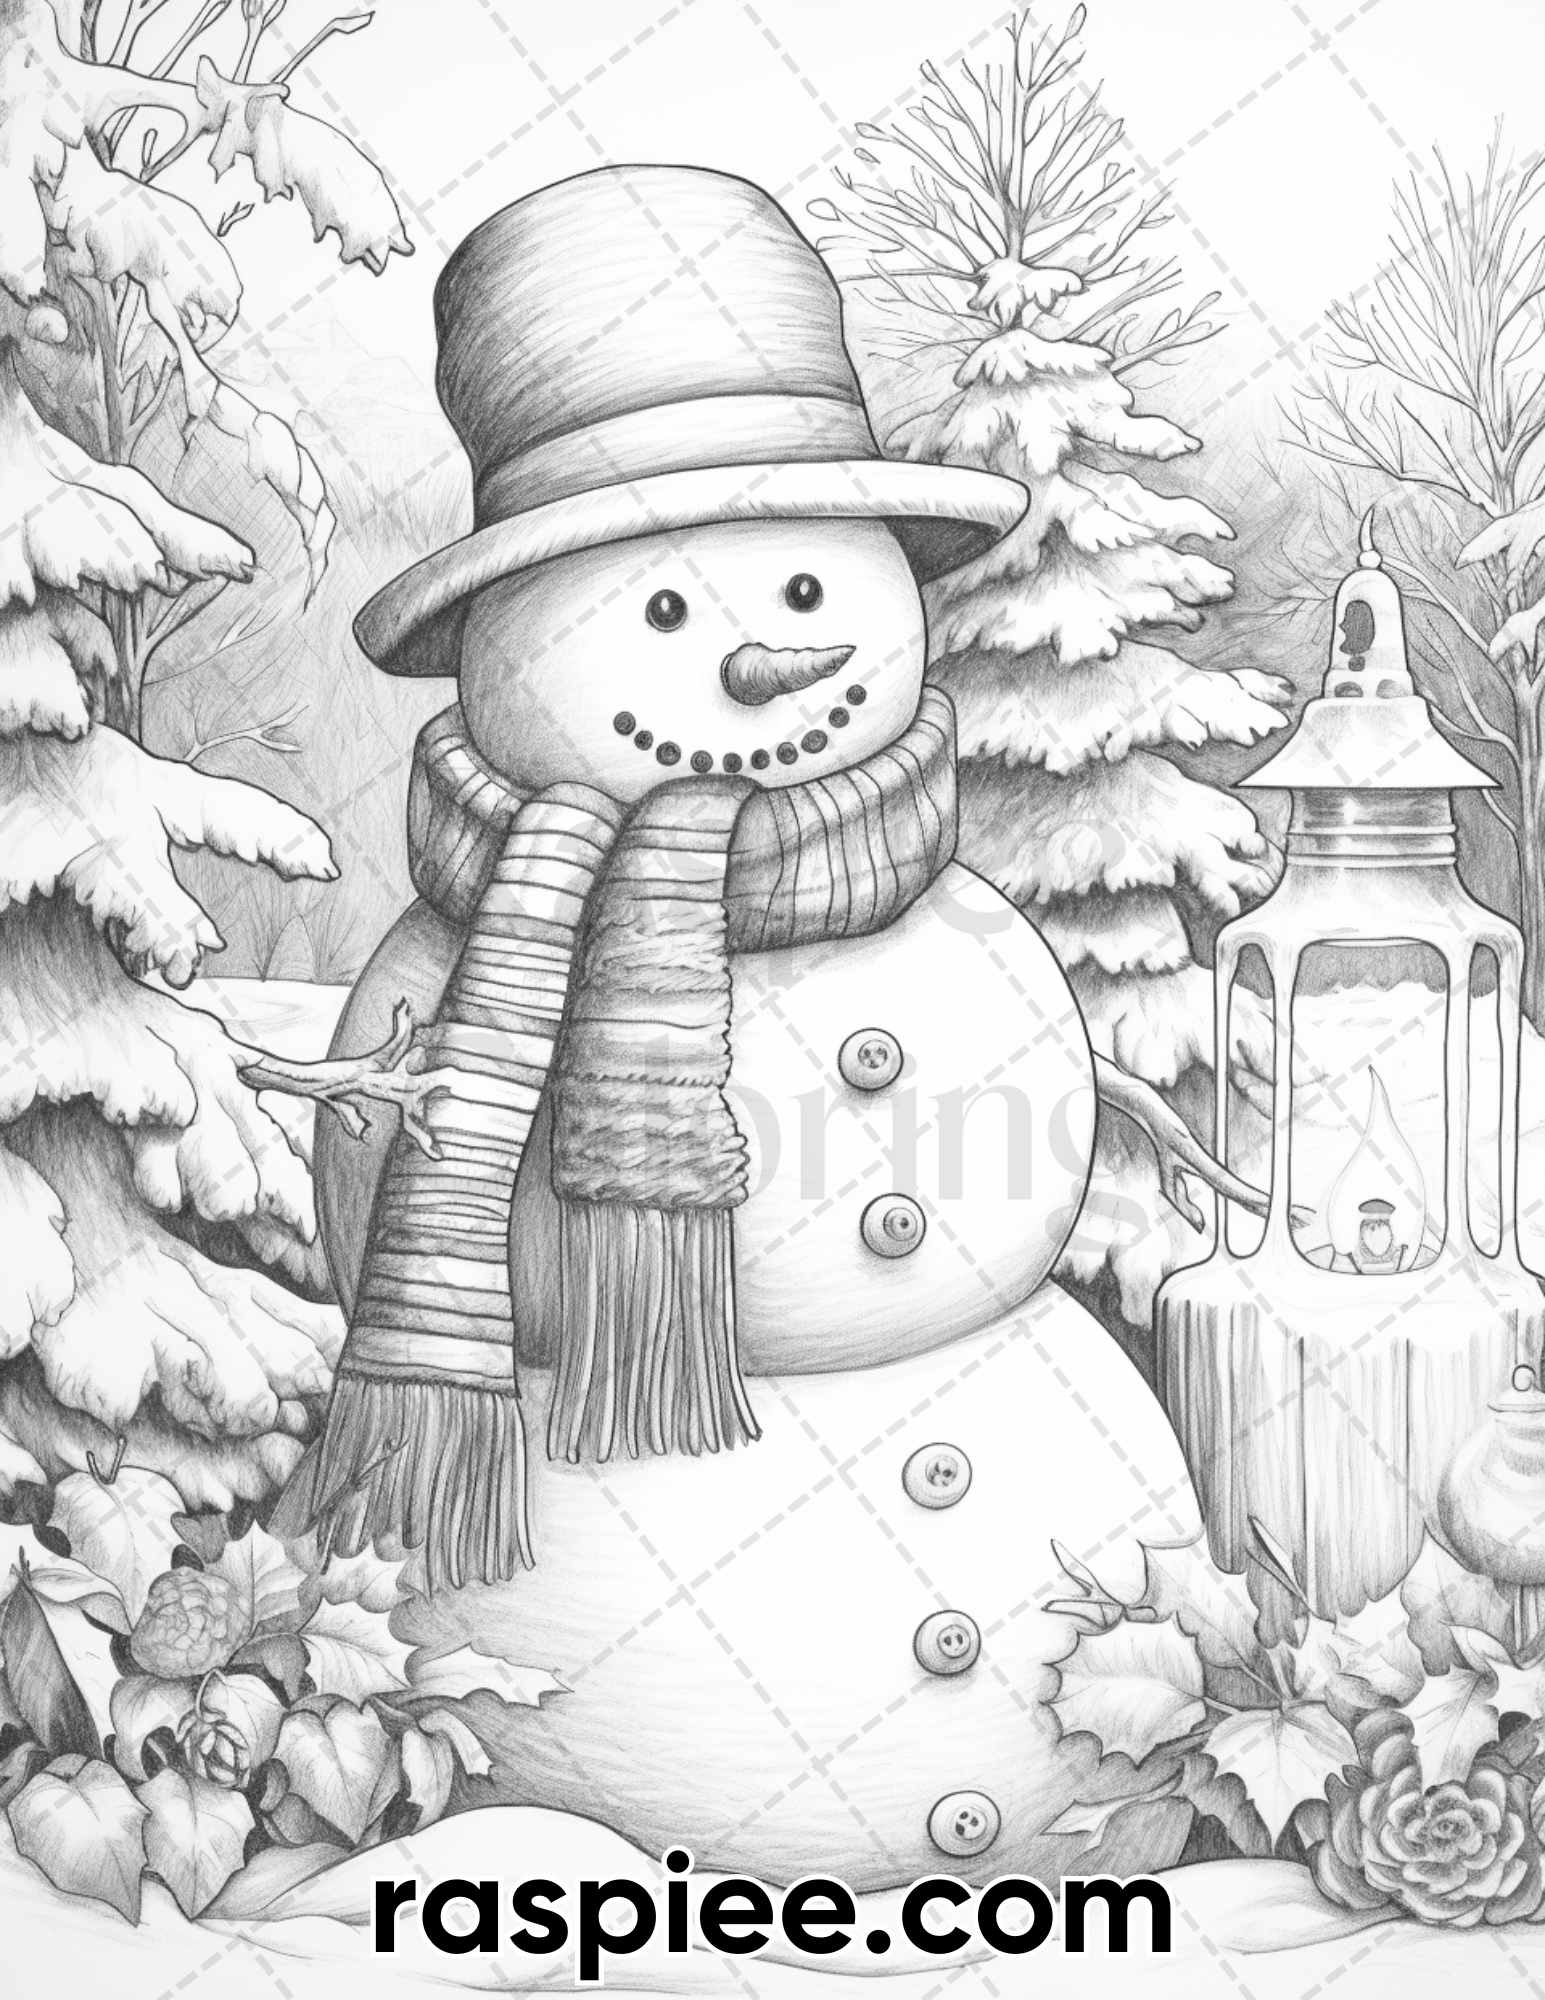 Christmas Snowman Coloring Page, Winter Holiday Coloring Book Printable, Relaxing Coloring Pages, Christmas Coloring Sheets, Christmas Coloring Book Printable, Xmas Coloring Pages, Holiday Coloring Pages, Winter Coloring Pages for Adults